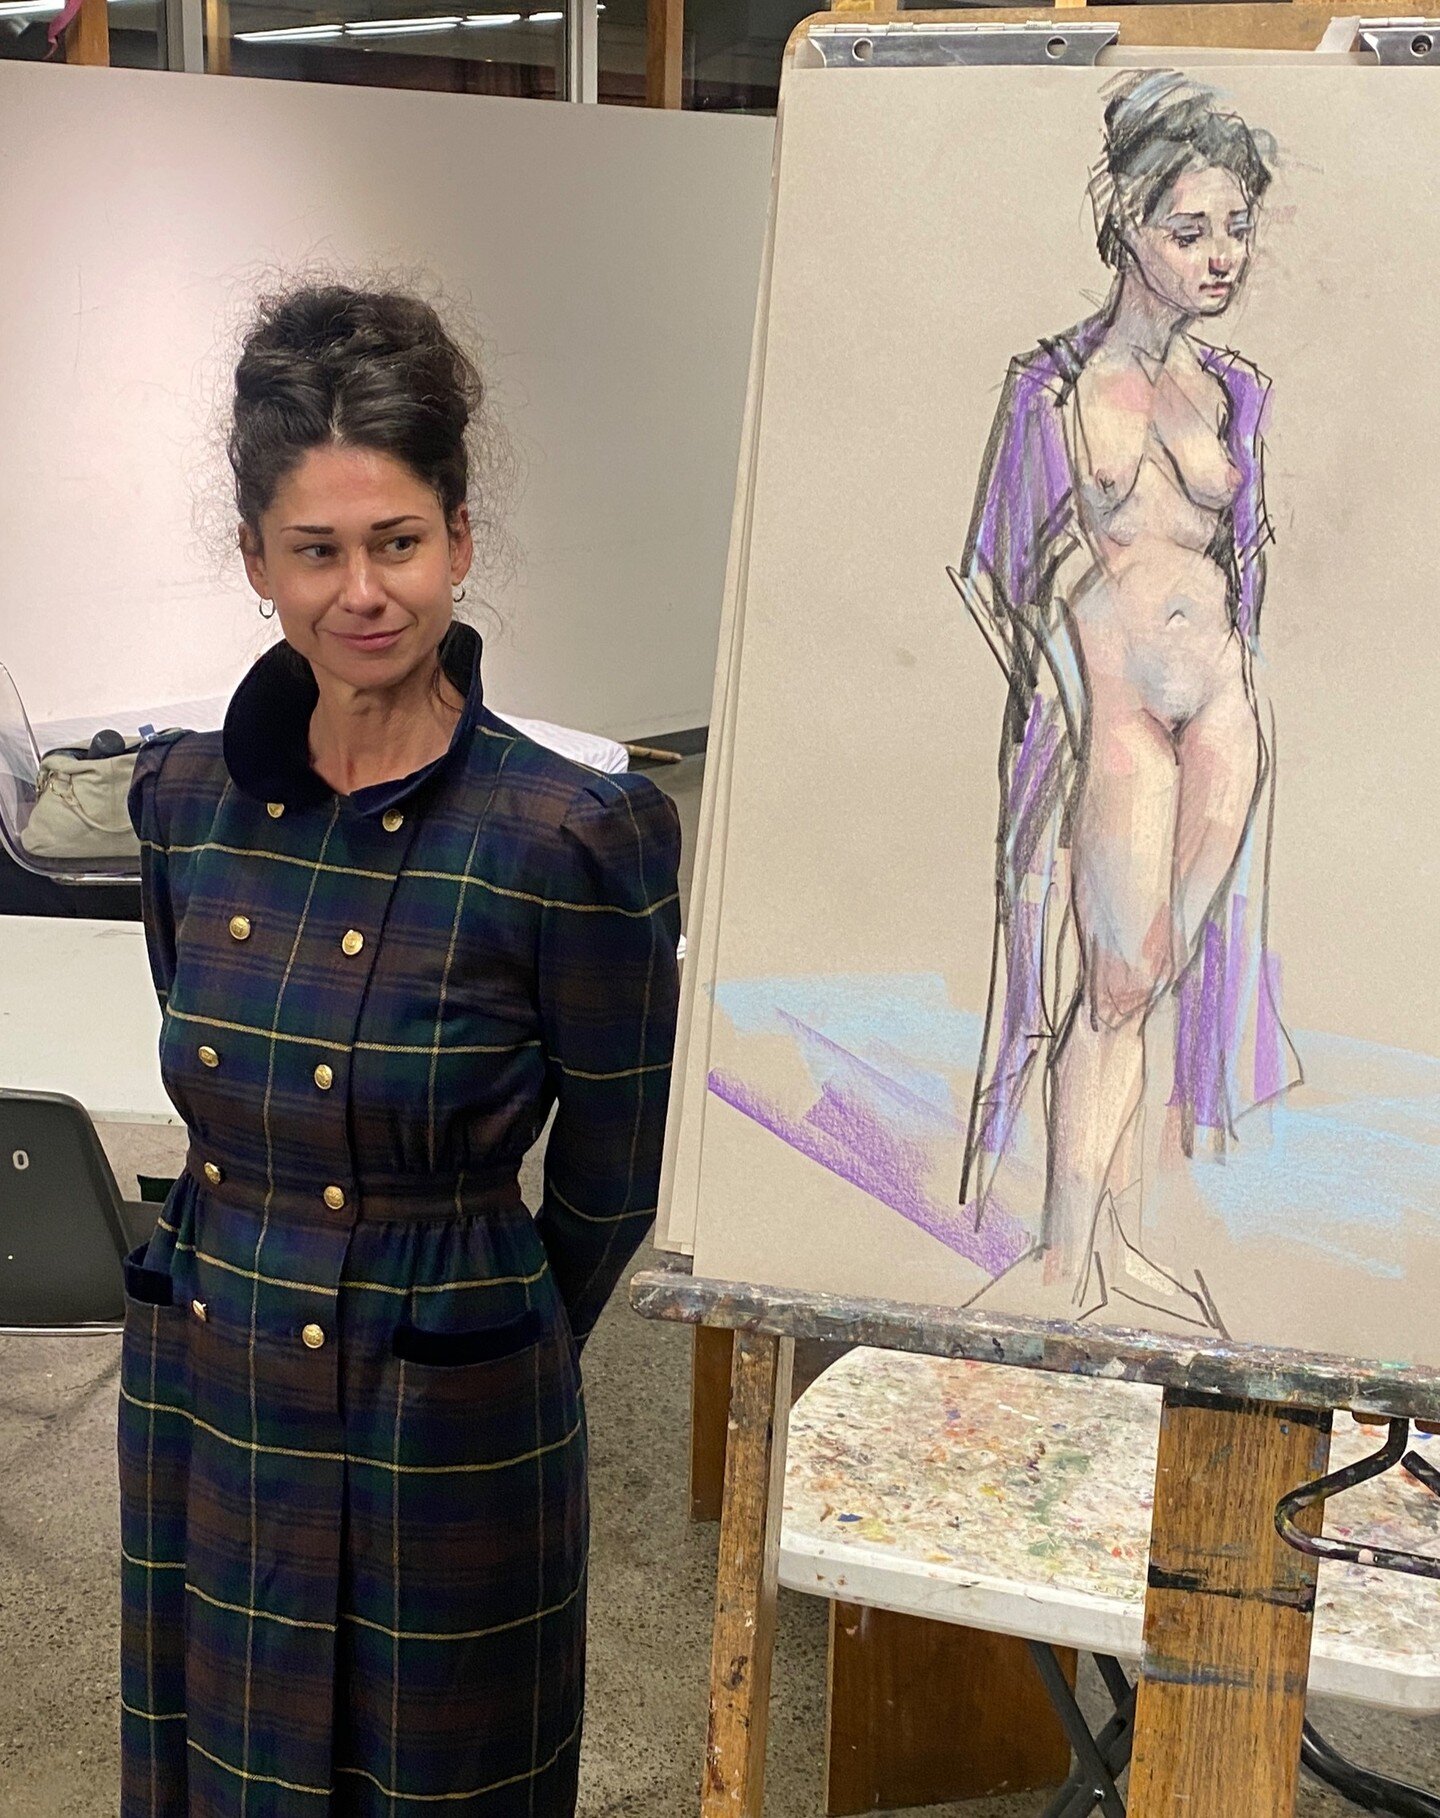 Leigh last night sporting accrutrements to go with her lively poses at PAAC. We had a great discussion of the advantages of life vs online drawing, but one of the coolest is the model walking amongst the drawings and talking with the artists during t